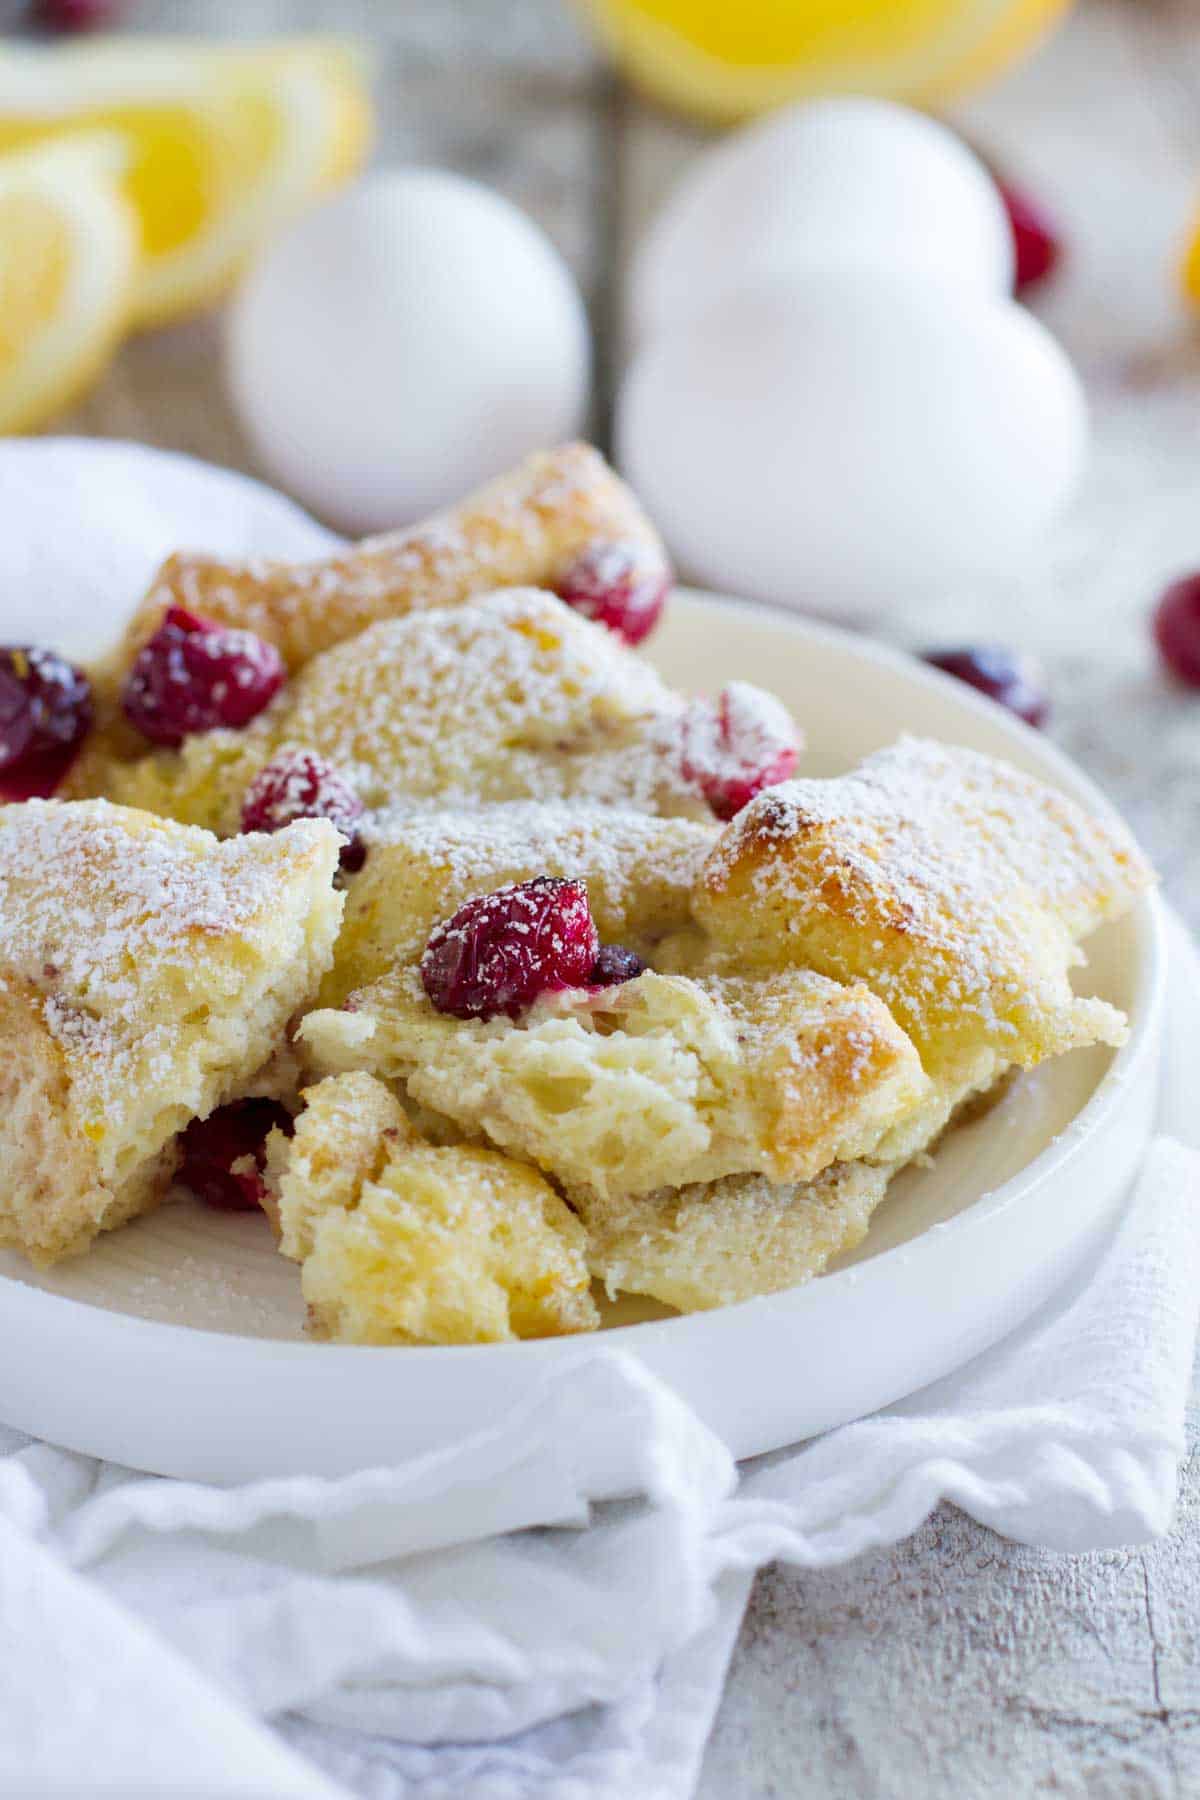 Cranberry Orange Baked French Toast Casserole on a plate, made with fresh cranberries and oranges.